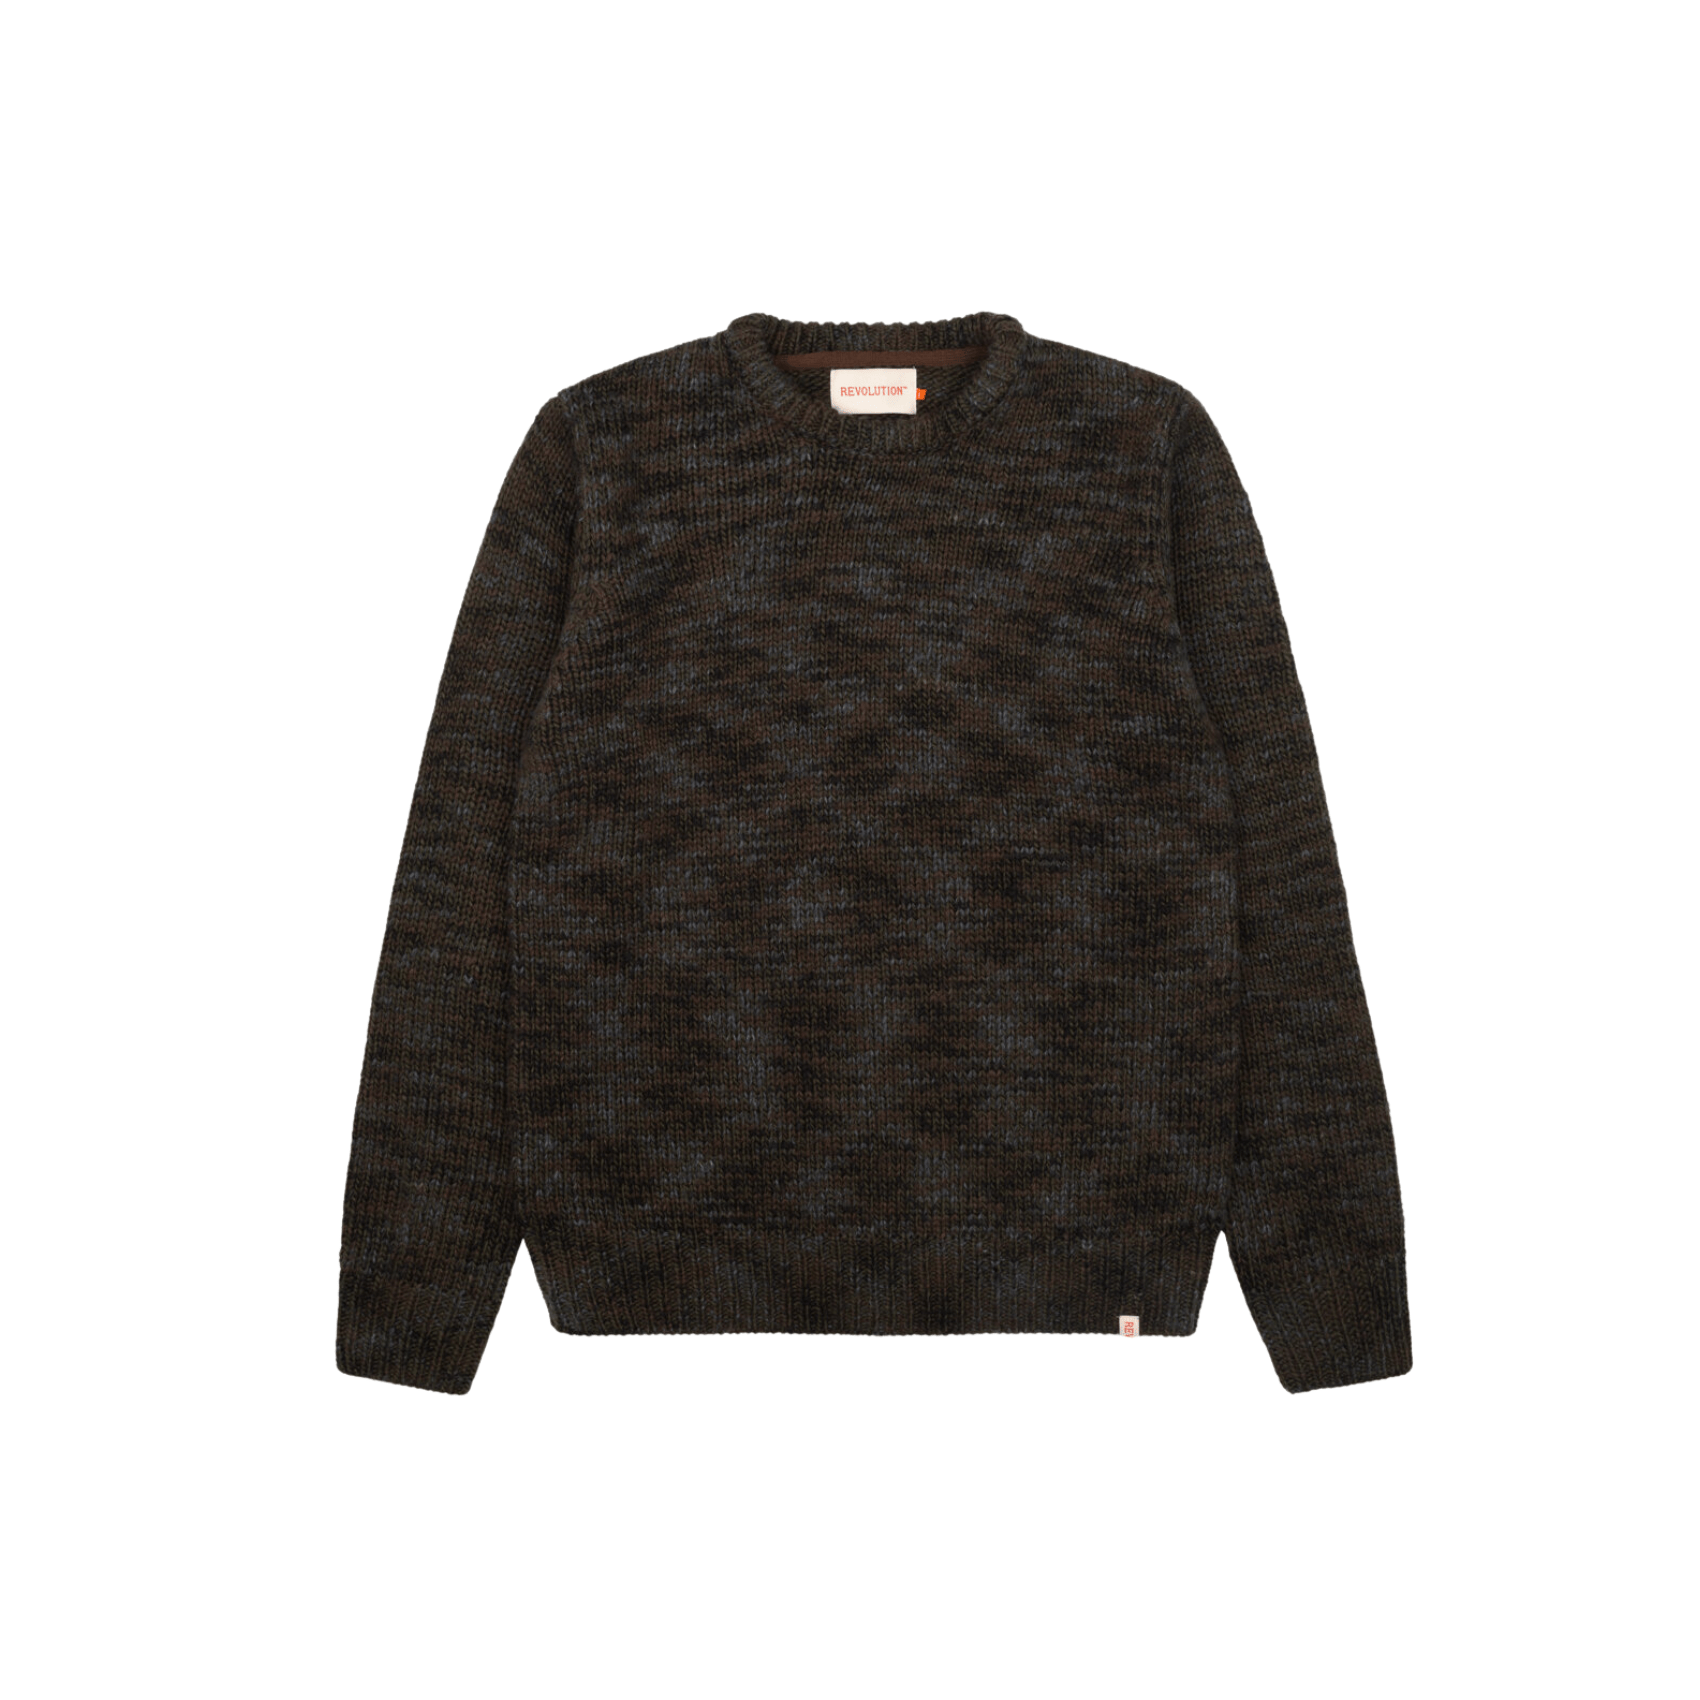 Structured Knit - Army